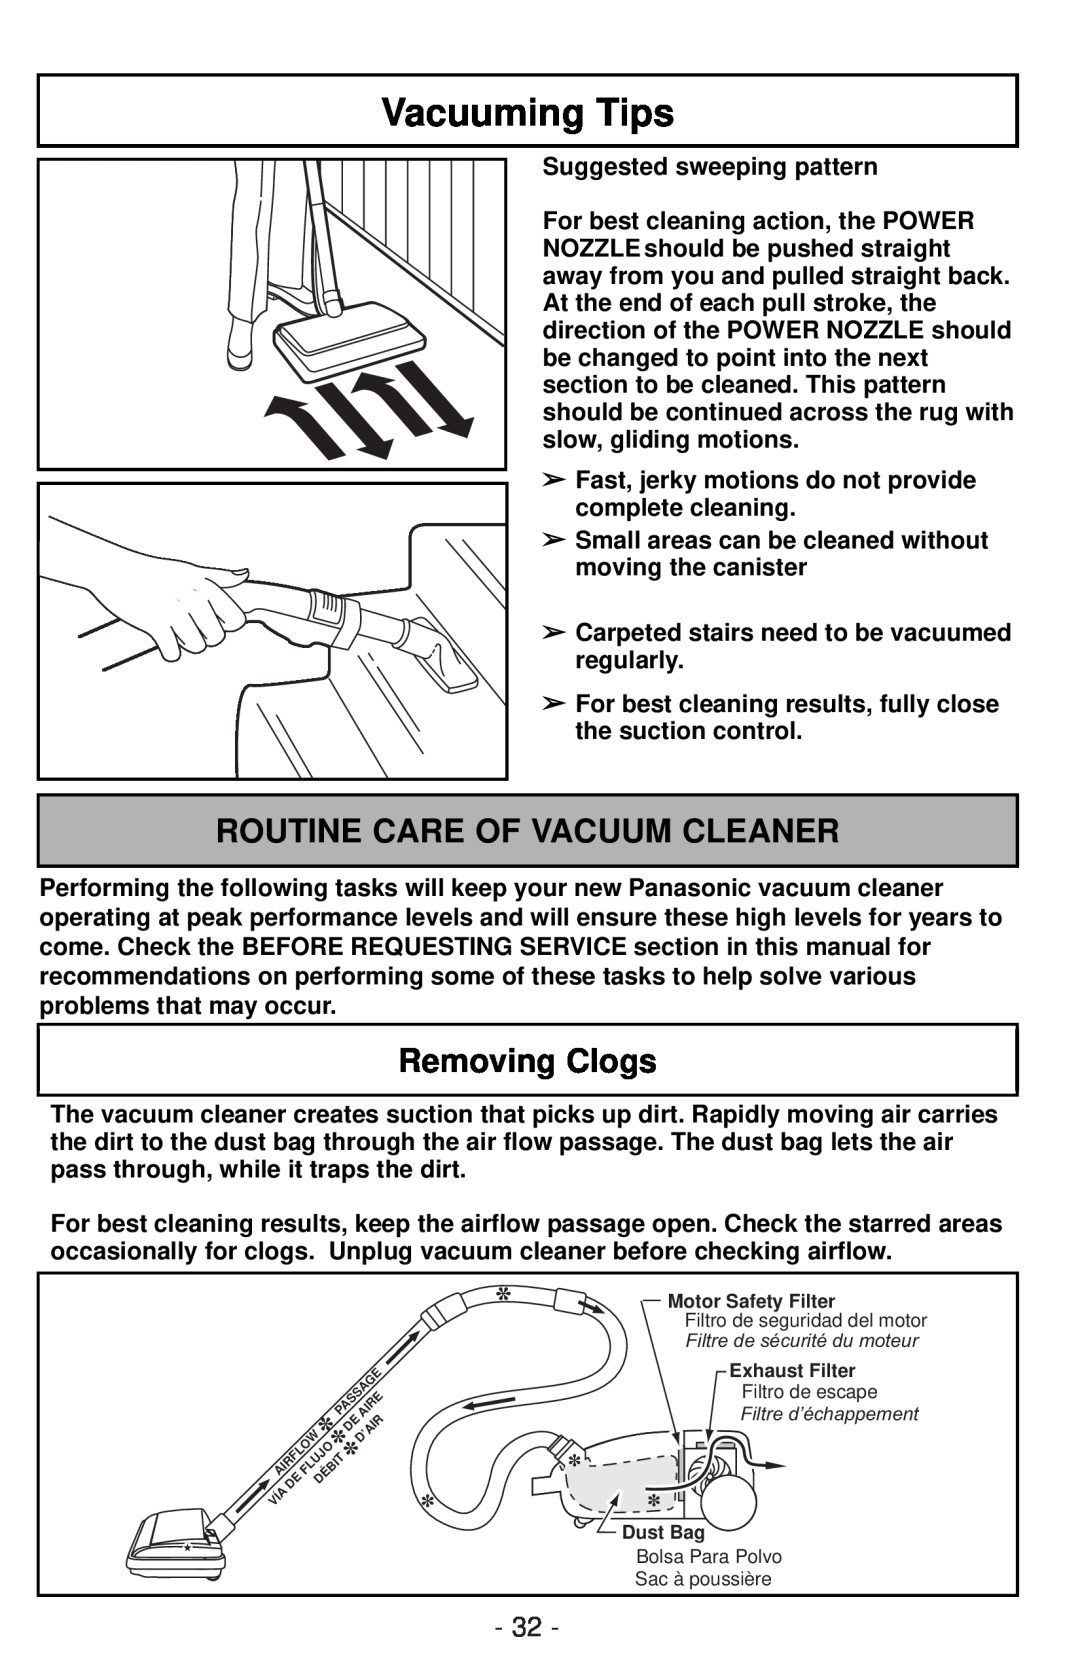 Panasonic MC-CG901 operating instructions Vacuuming Tips, Routine Care Of Vacuum Cleaner, Removing Clogs 